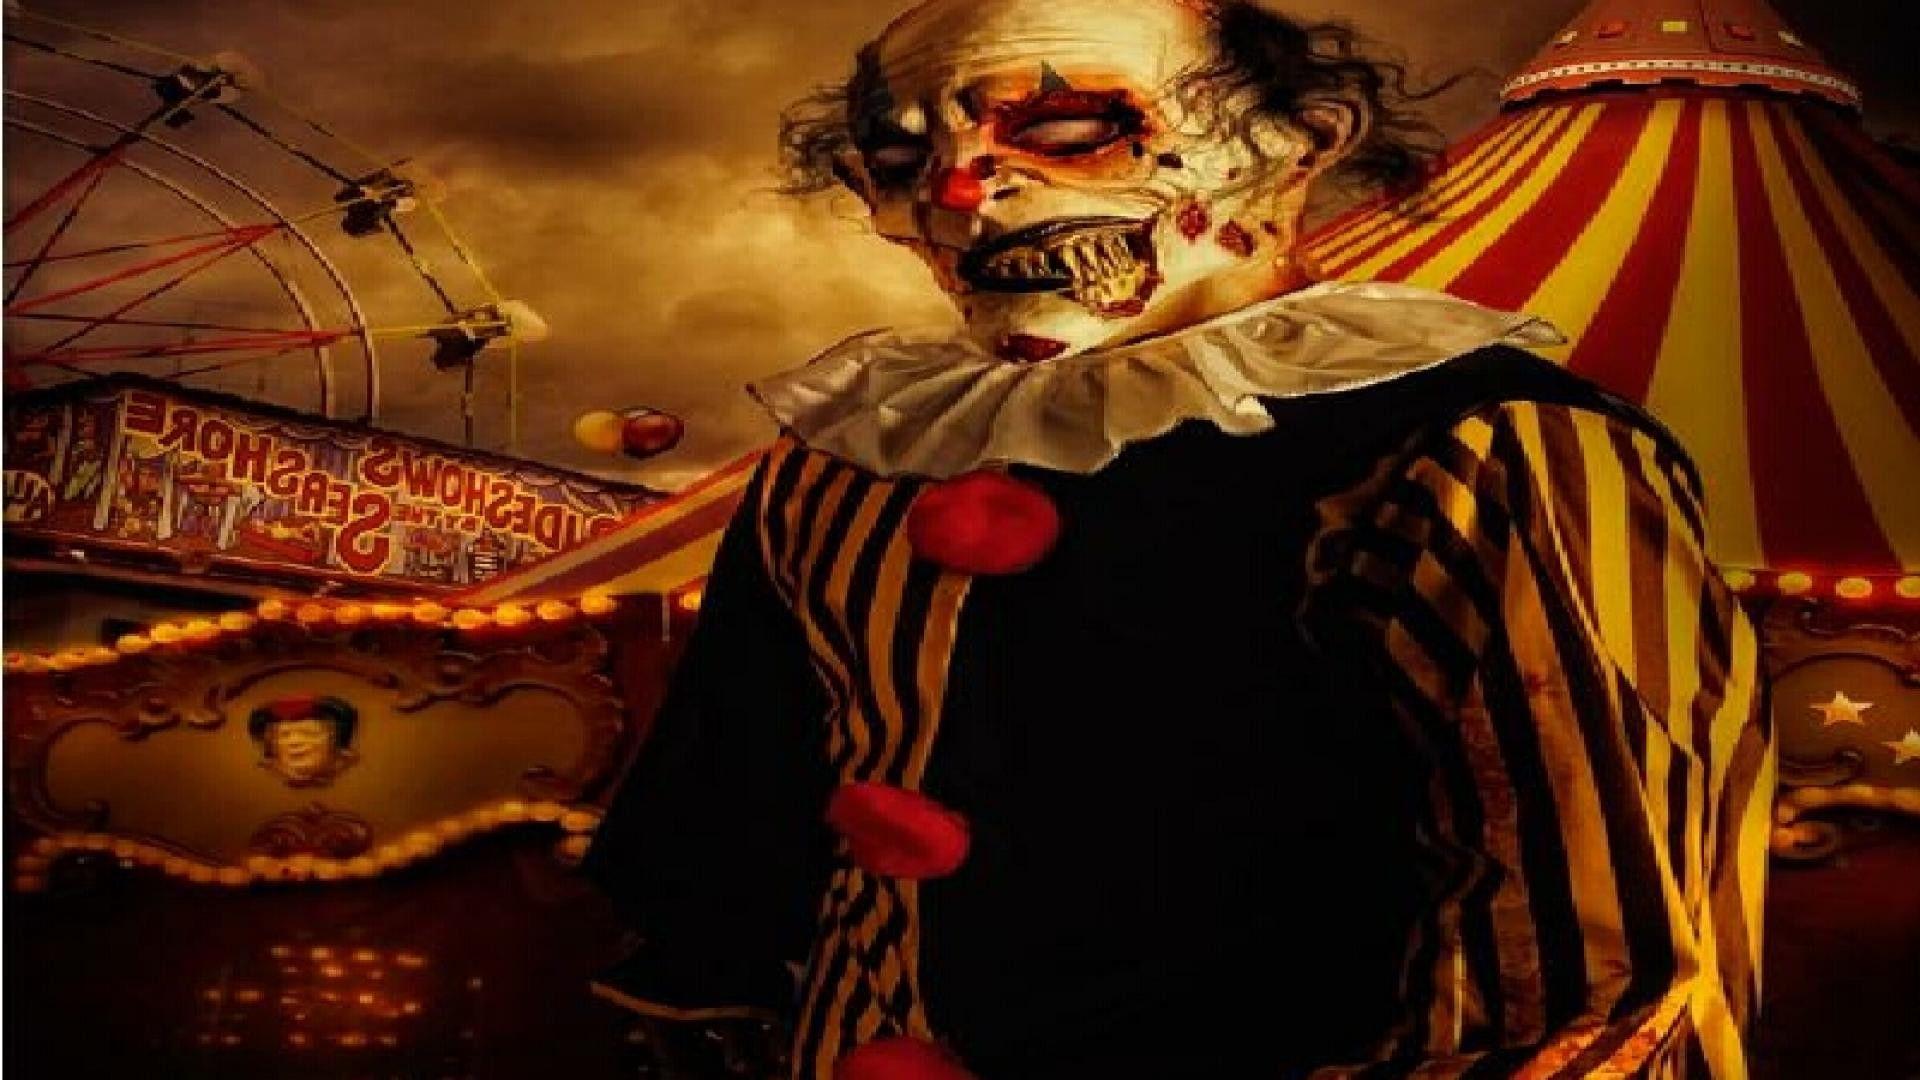 Clown Wallpaper Scary Awesome Scary Clowns